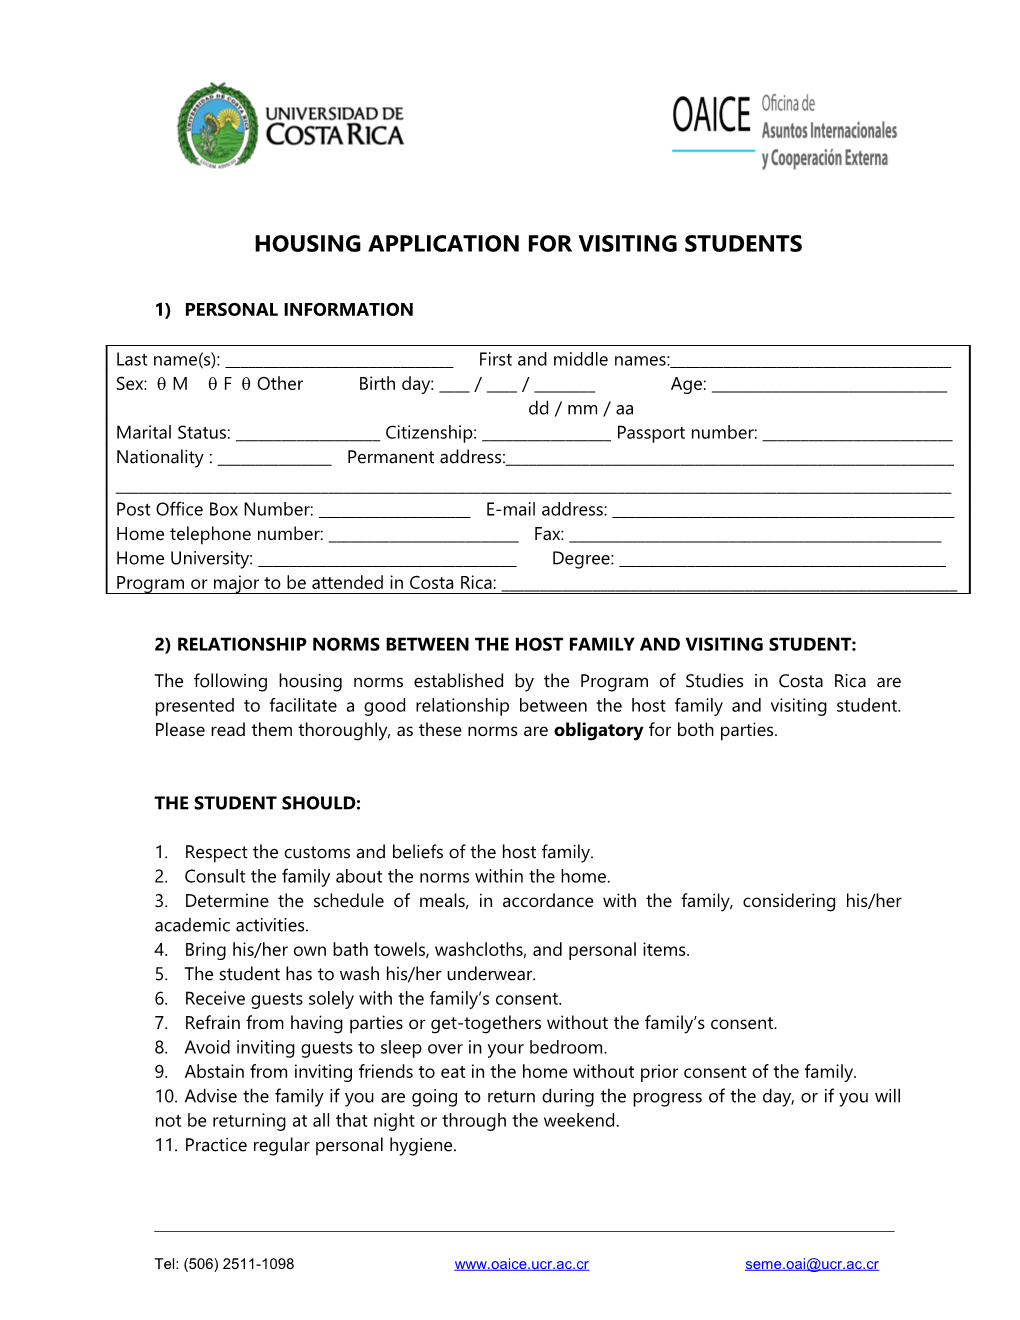 Housing Application for Visiting Students